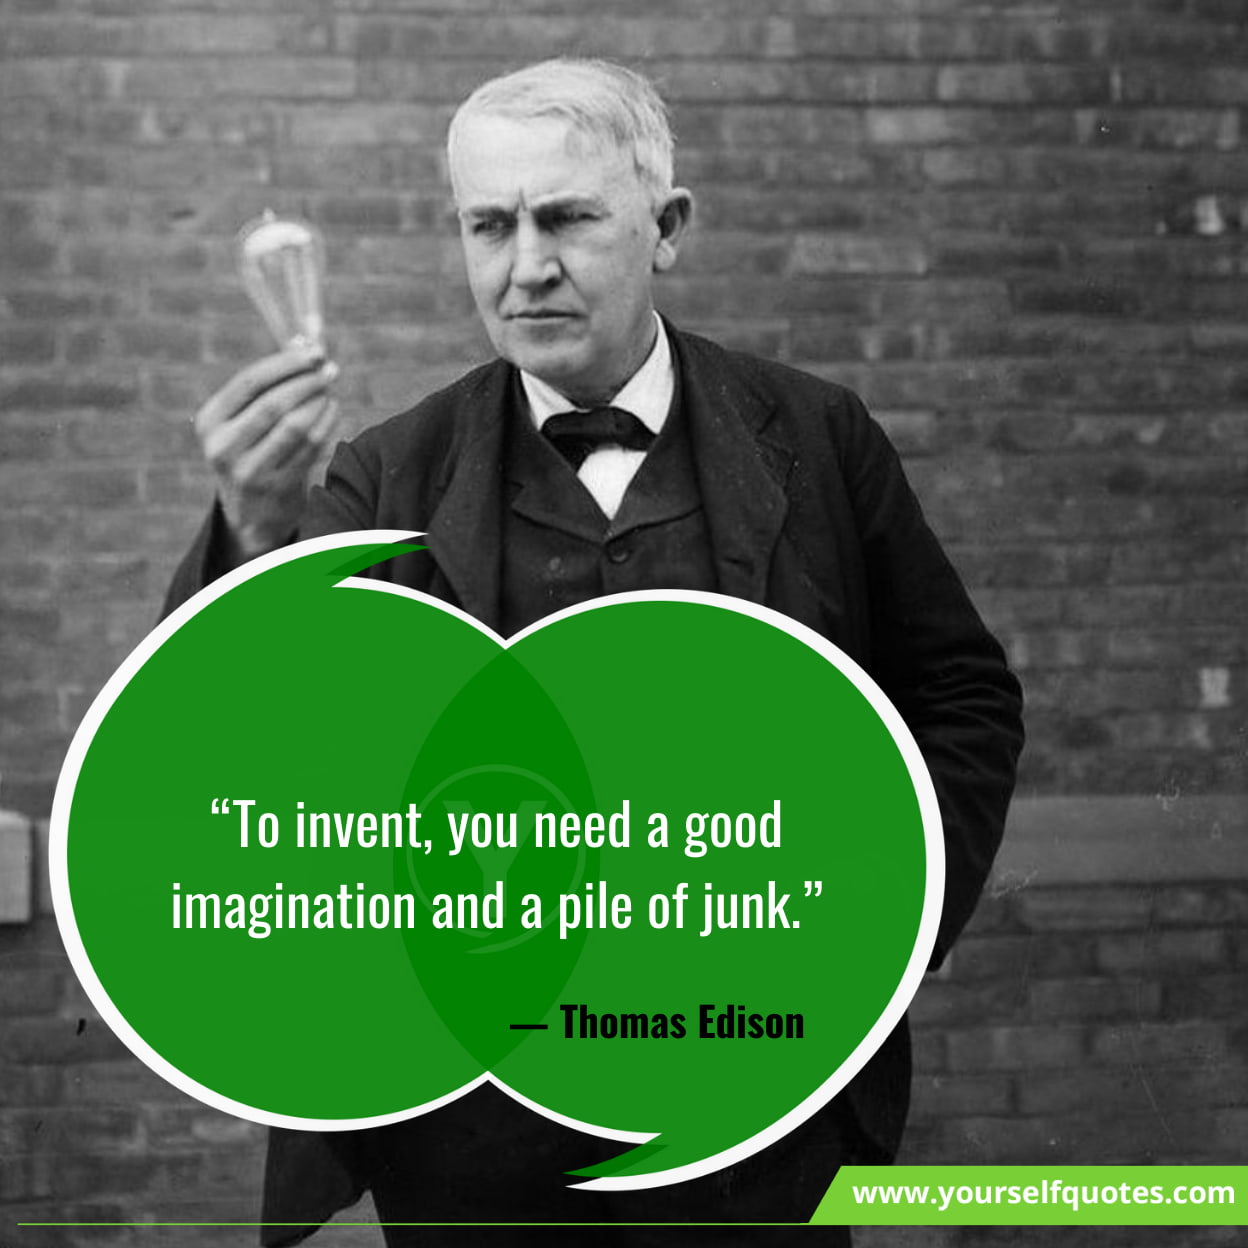 Thomas Edison Quotes About Invention